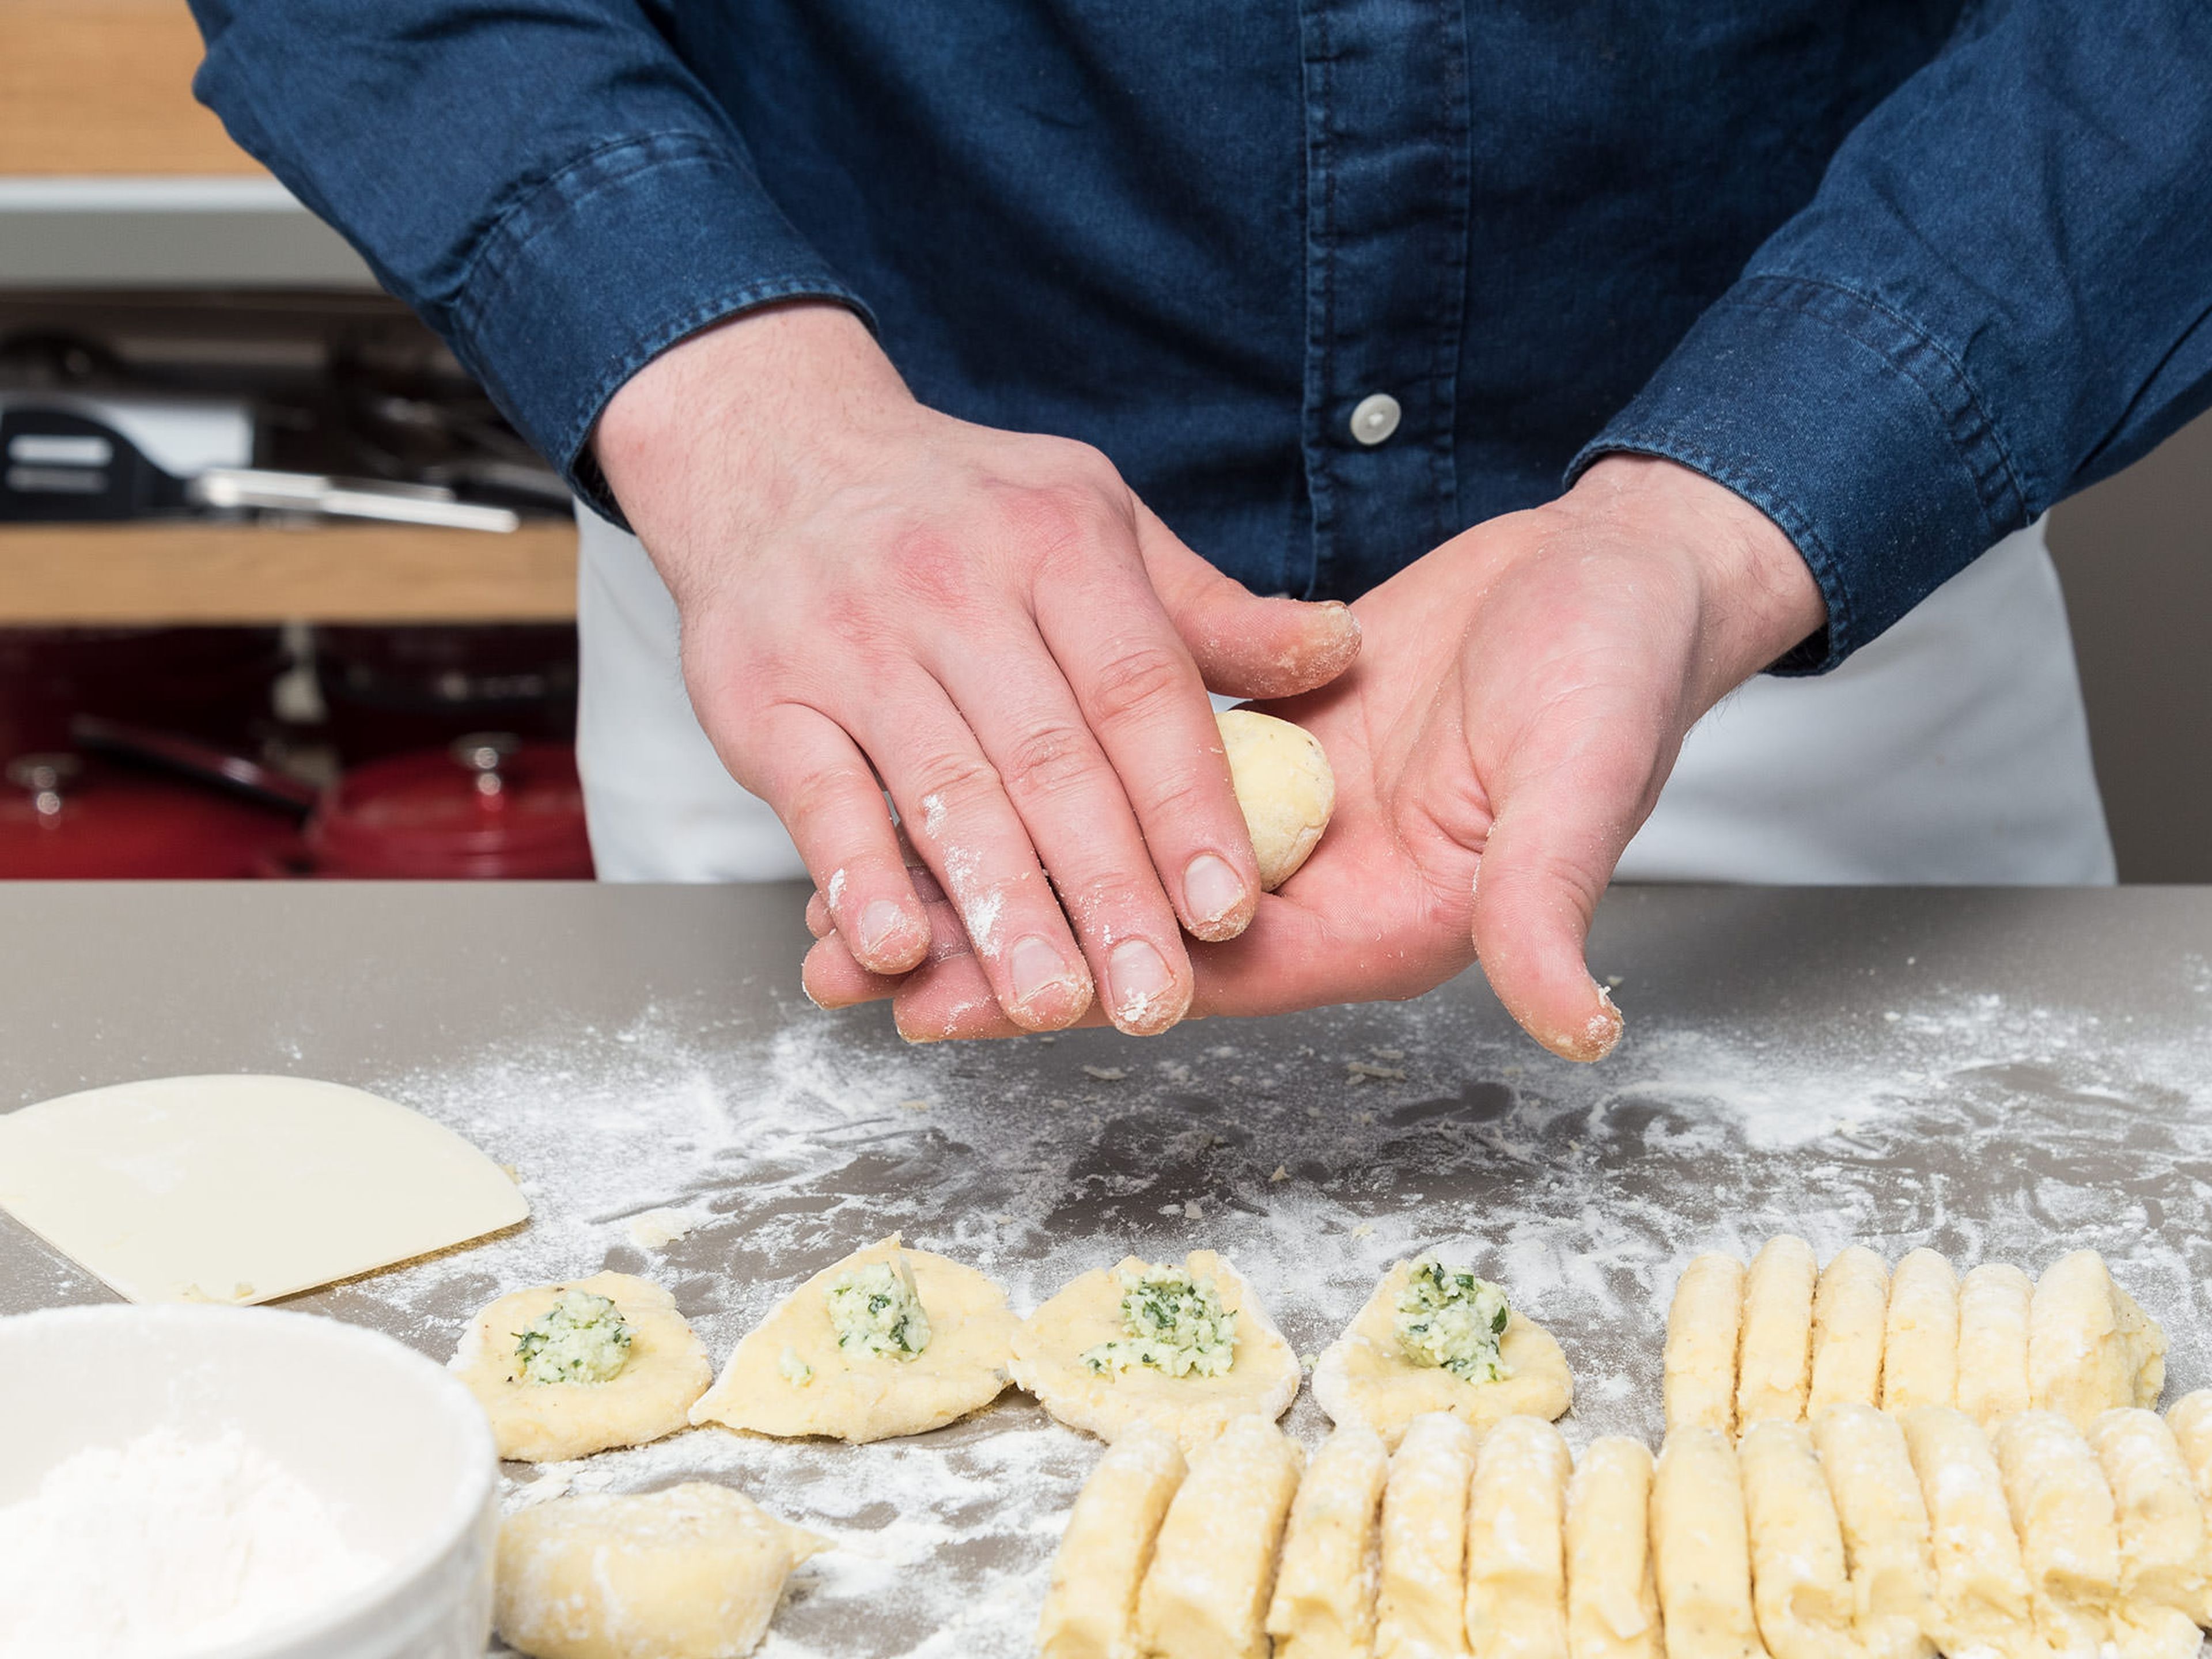 Divide dough in half and roll each half into a log. Cut into even thumb thick pieces. Press lightly to flatten and add a teaspoon of chilled mozzarella filling to each piece. Roll into balls and set aside on a floured surface. Press each gnocchi gently with a fork. When all the gnocchi are filled, cook them immediately in salted, simmering water until they float.